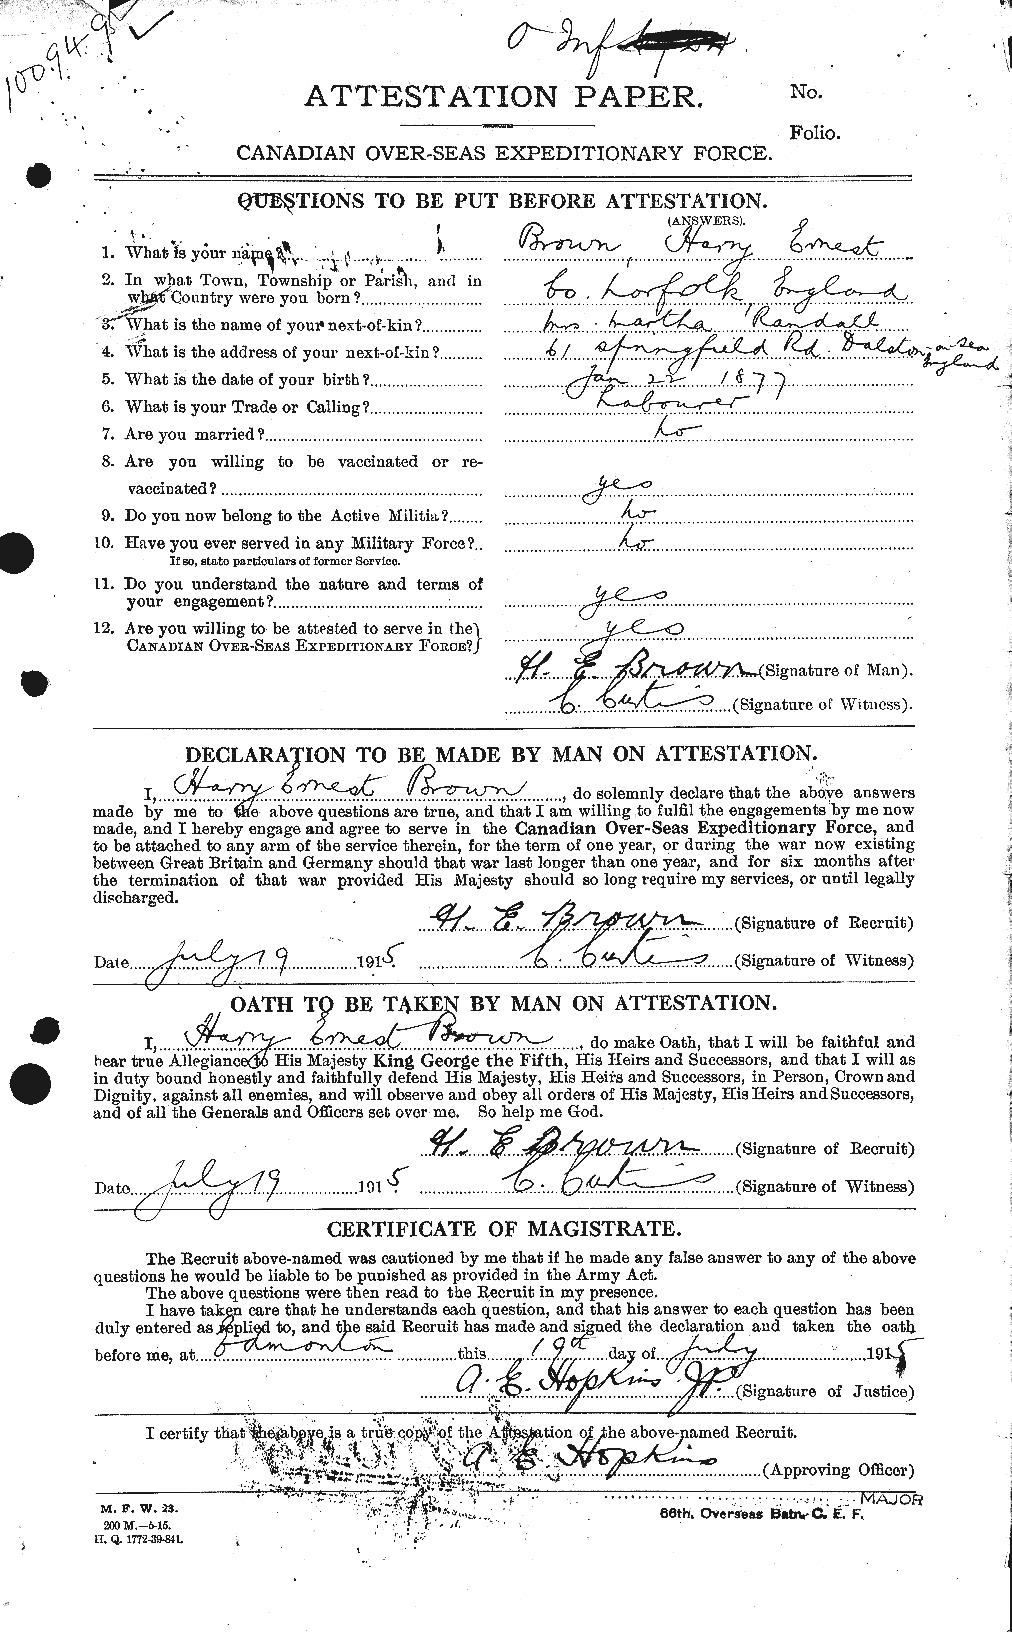 Personnel Records of the First World War - CEF 265453a